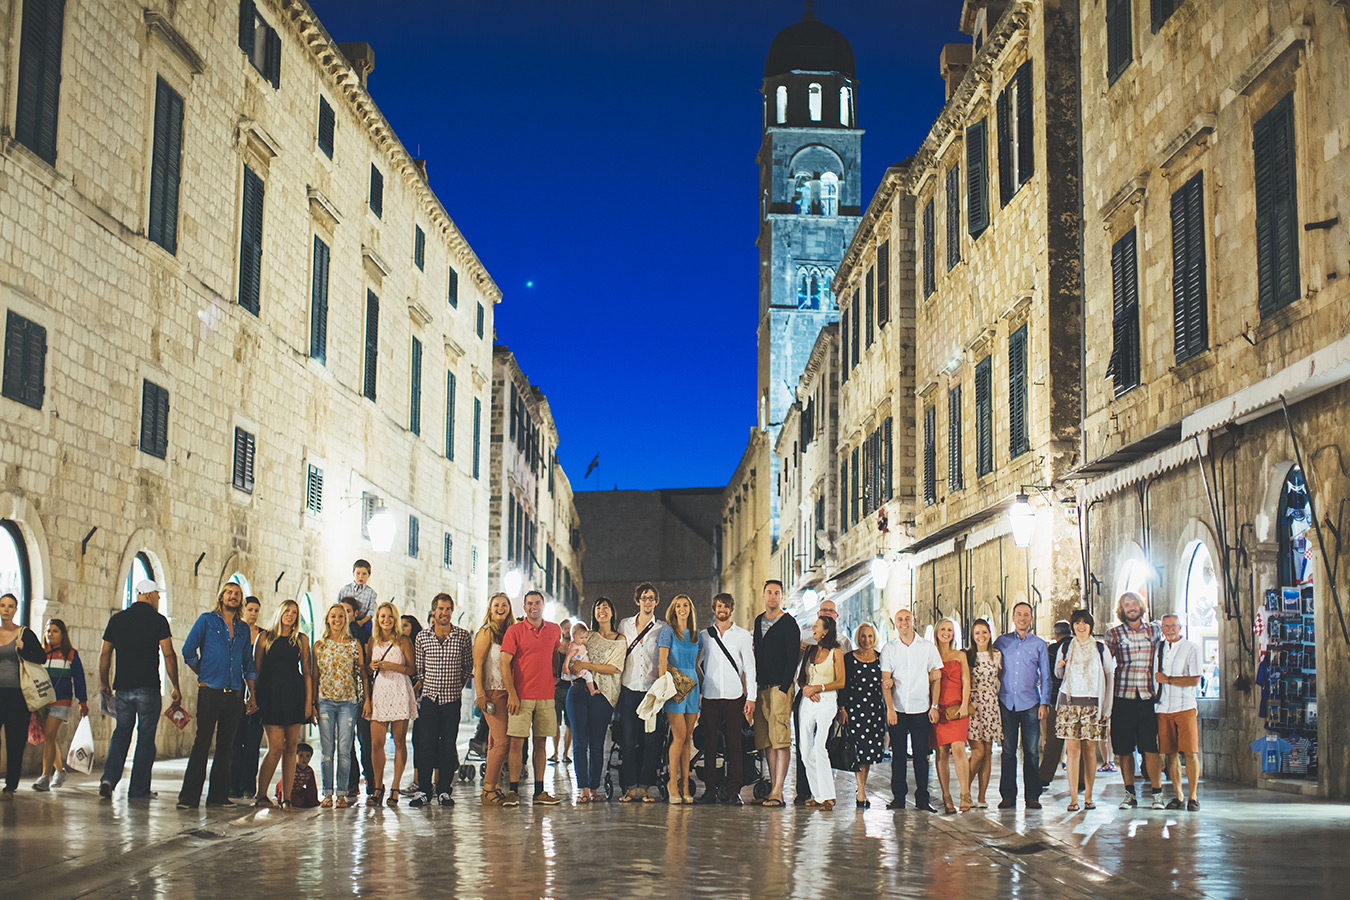 One of a set of images taken at this chic destination Wedding of Jenna & Nick. The stylish old town of Dubrovnik, Croatia.  Photography by Matt Porteous